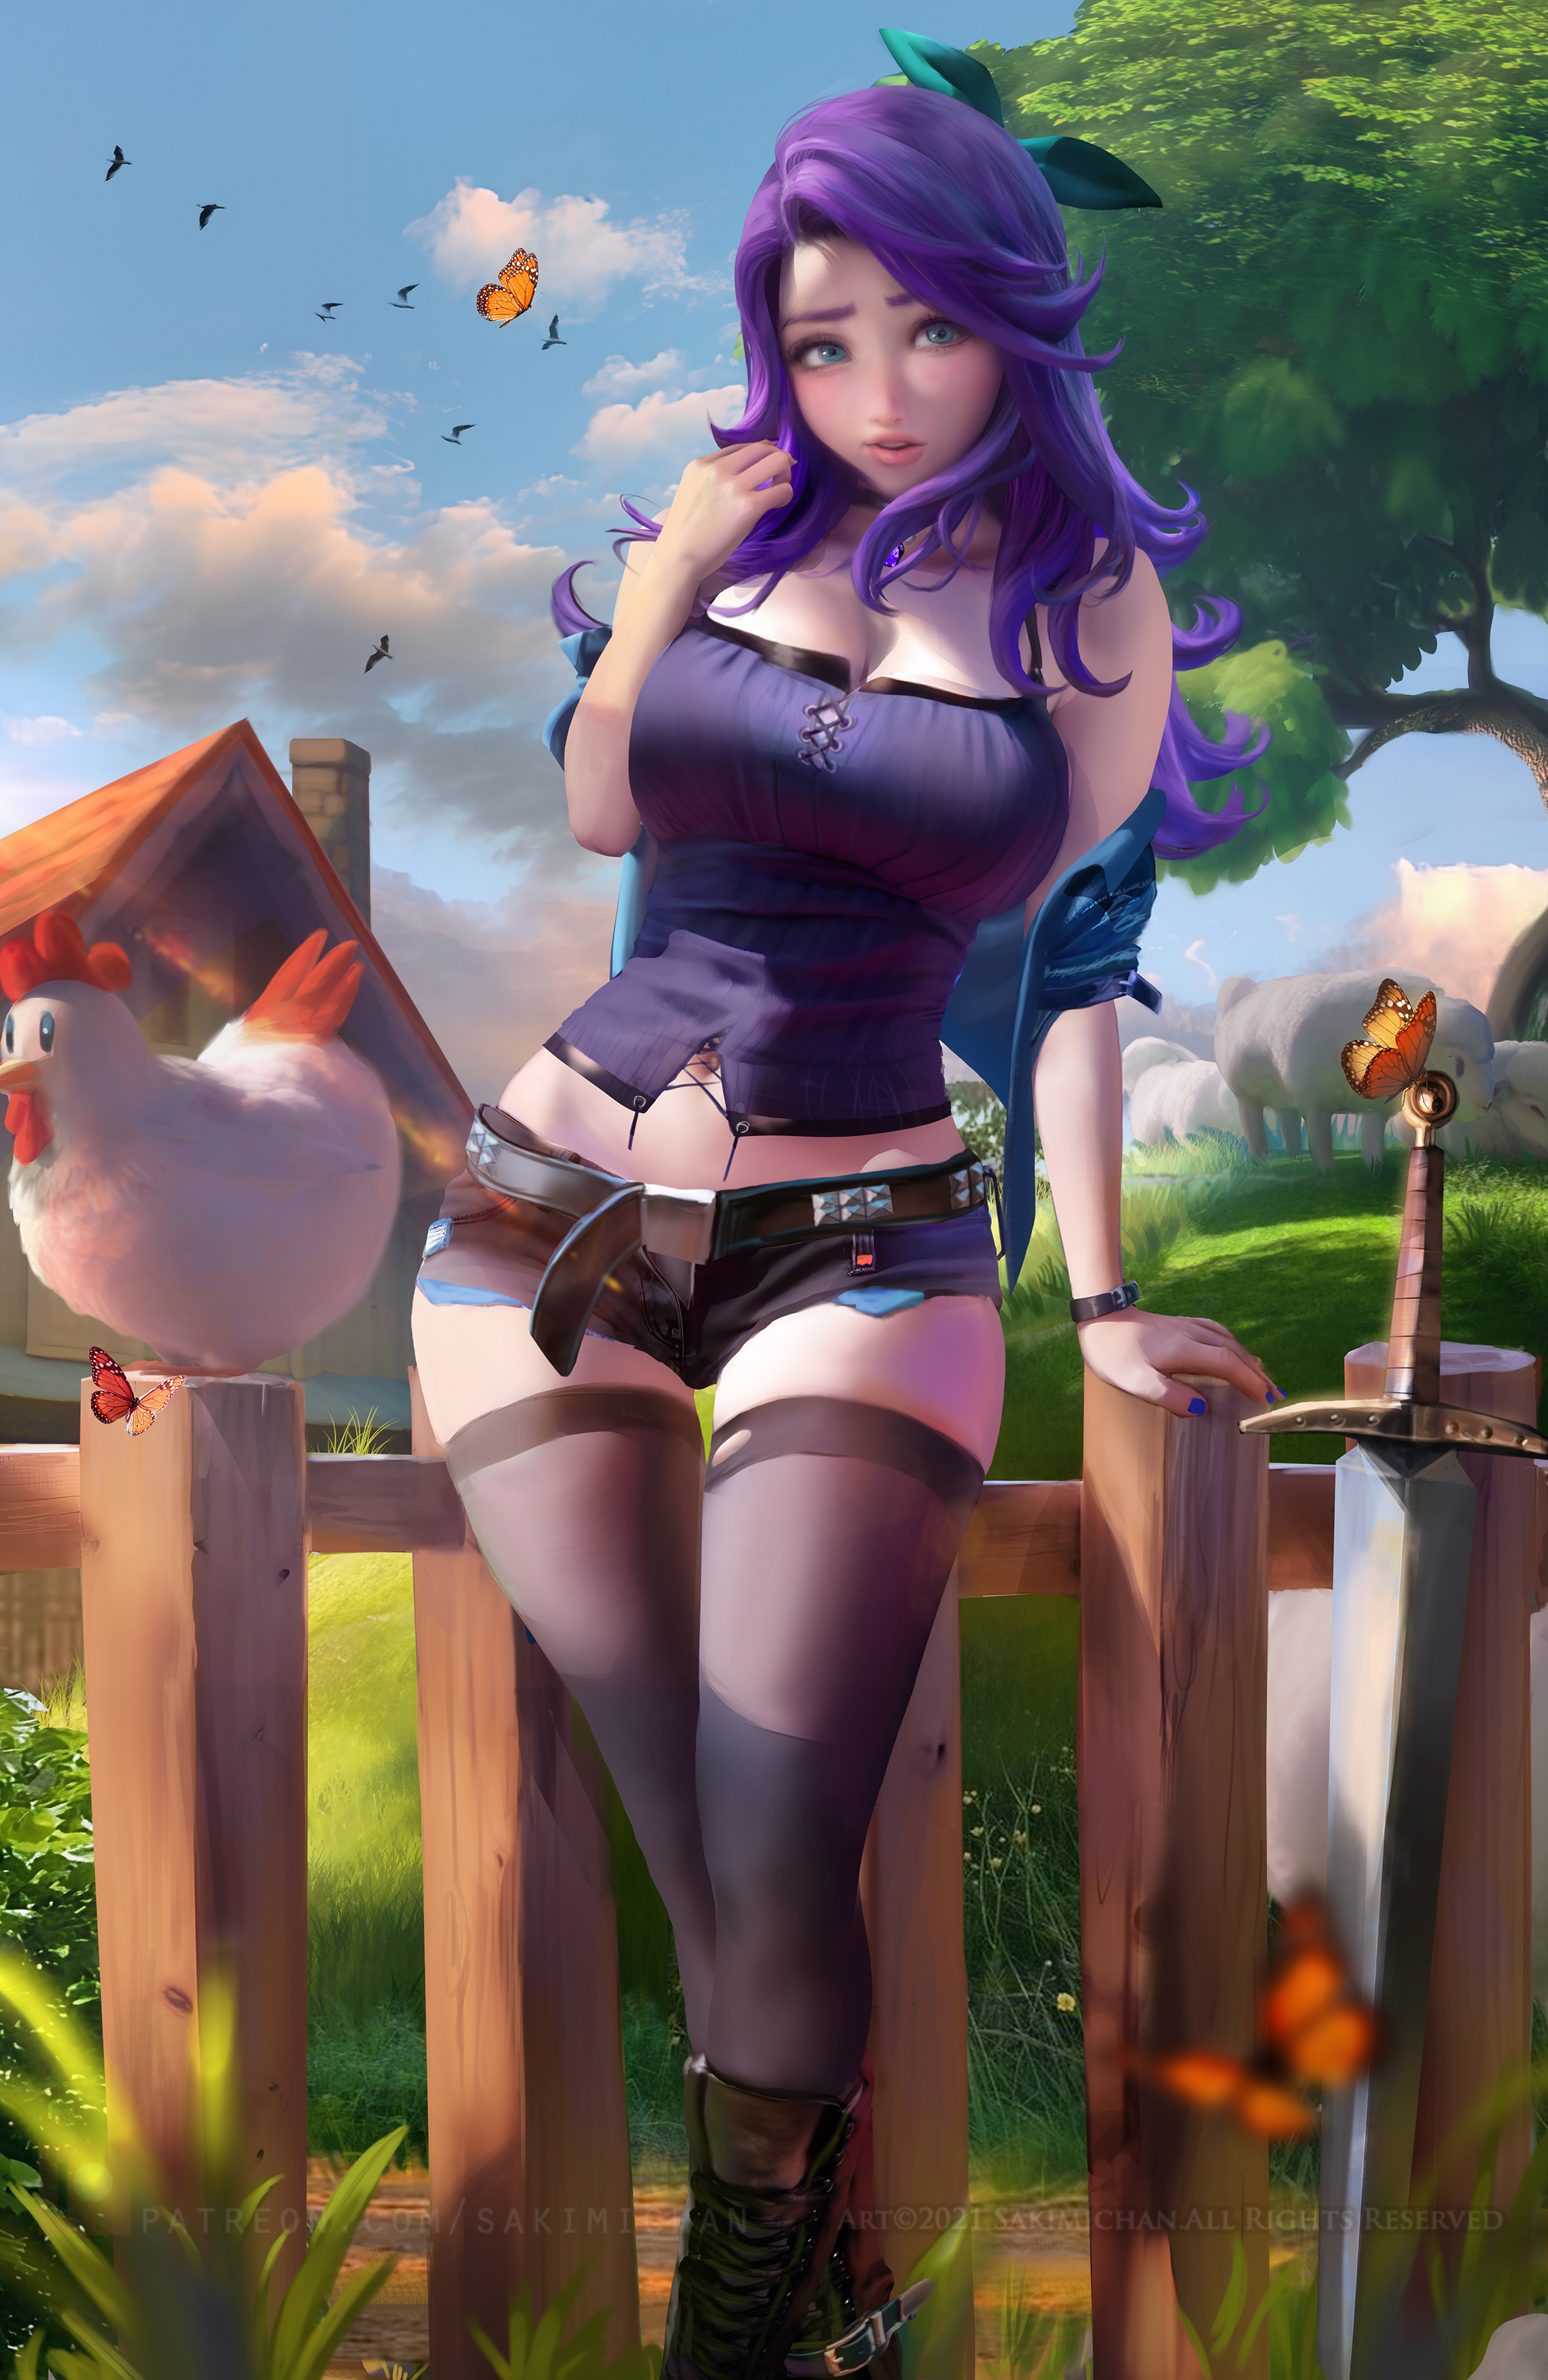 Abigail Stardew Valley Stardew Valley Video Games Video Game Girls Video Game Characters Artwork Dra 2277x3500